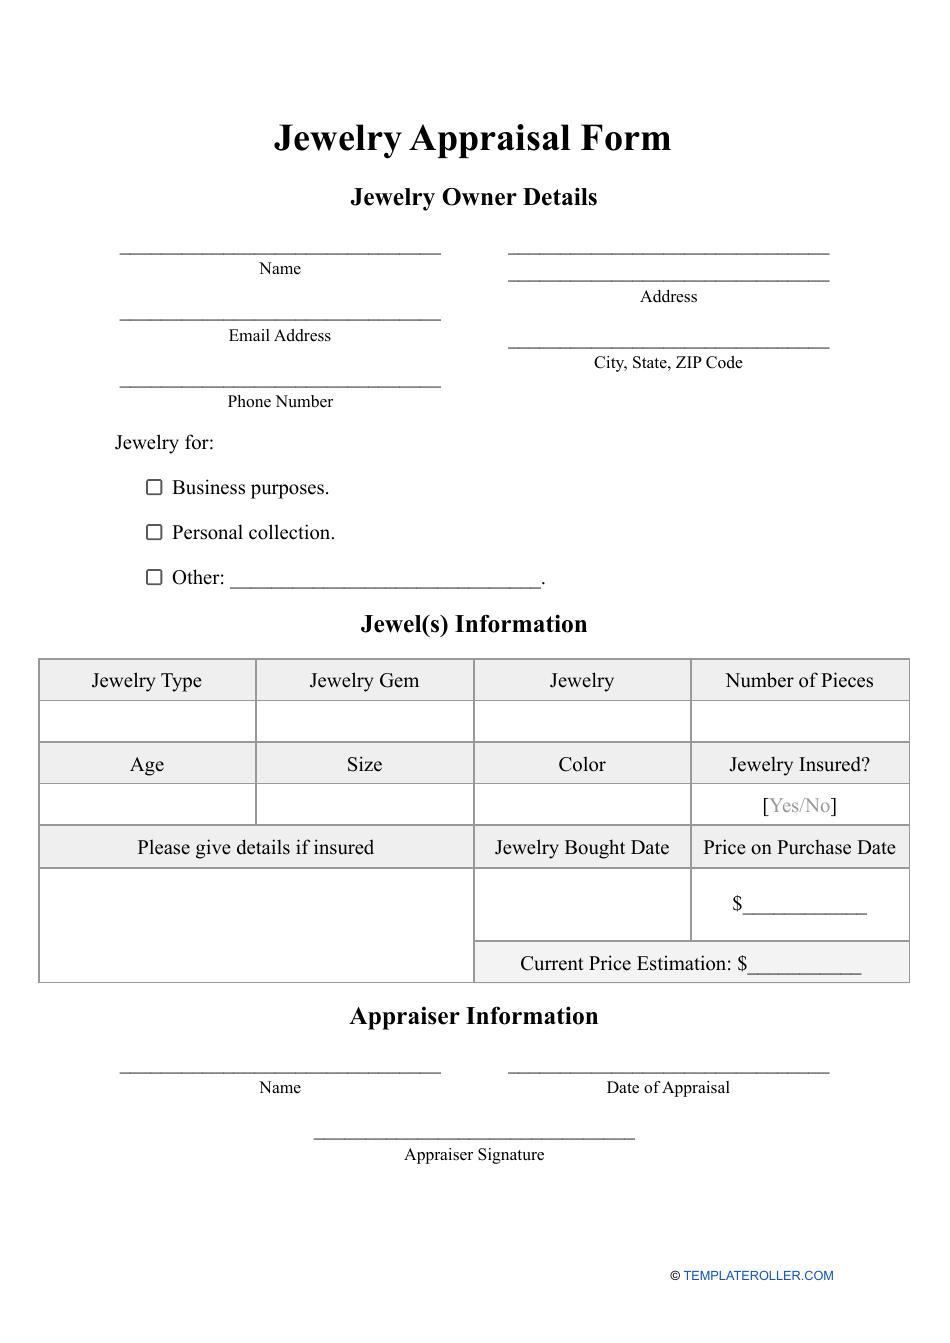 Jewelry Appraisal Form Fill Out, Sign Online and Download PDF